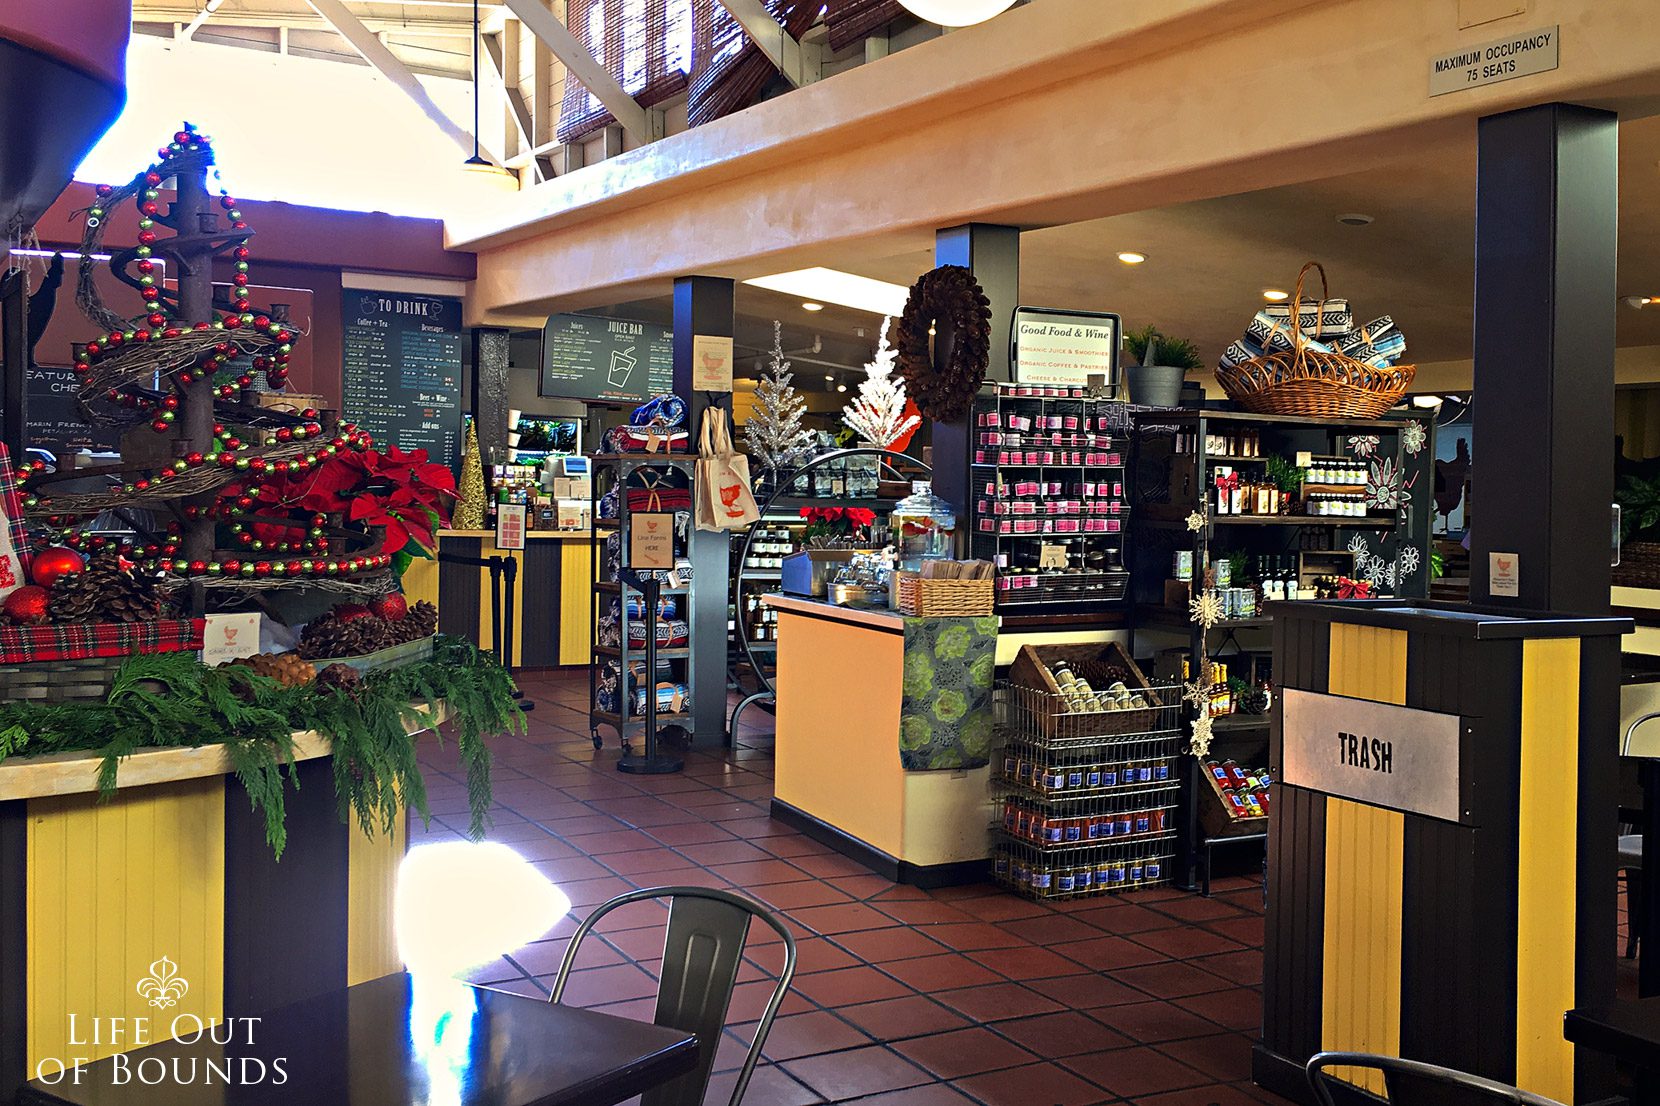 Carmel-Belle-cafe-and-larder-in-Carmel-by-the-Sea-California